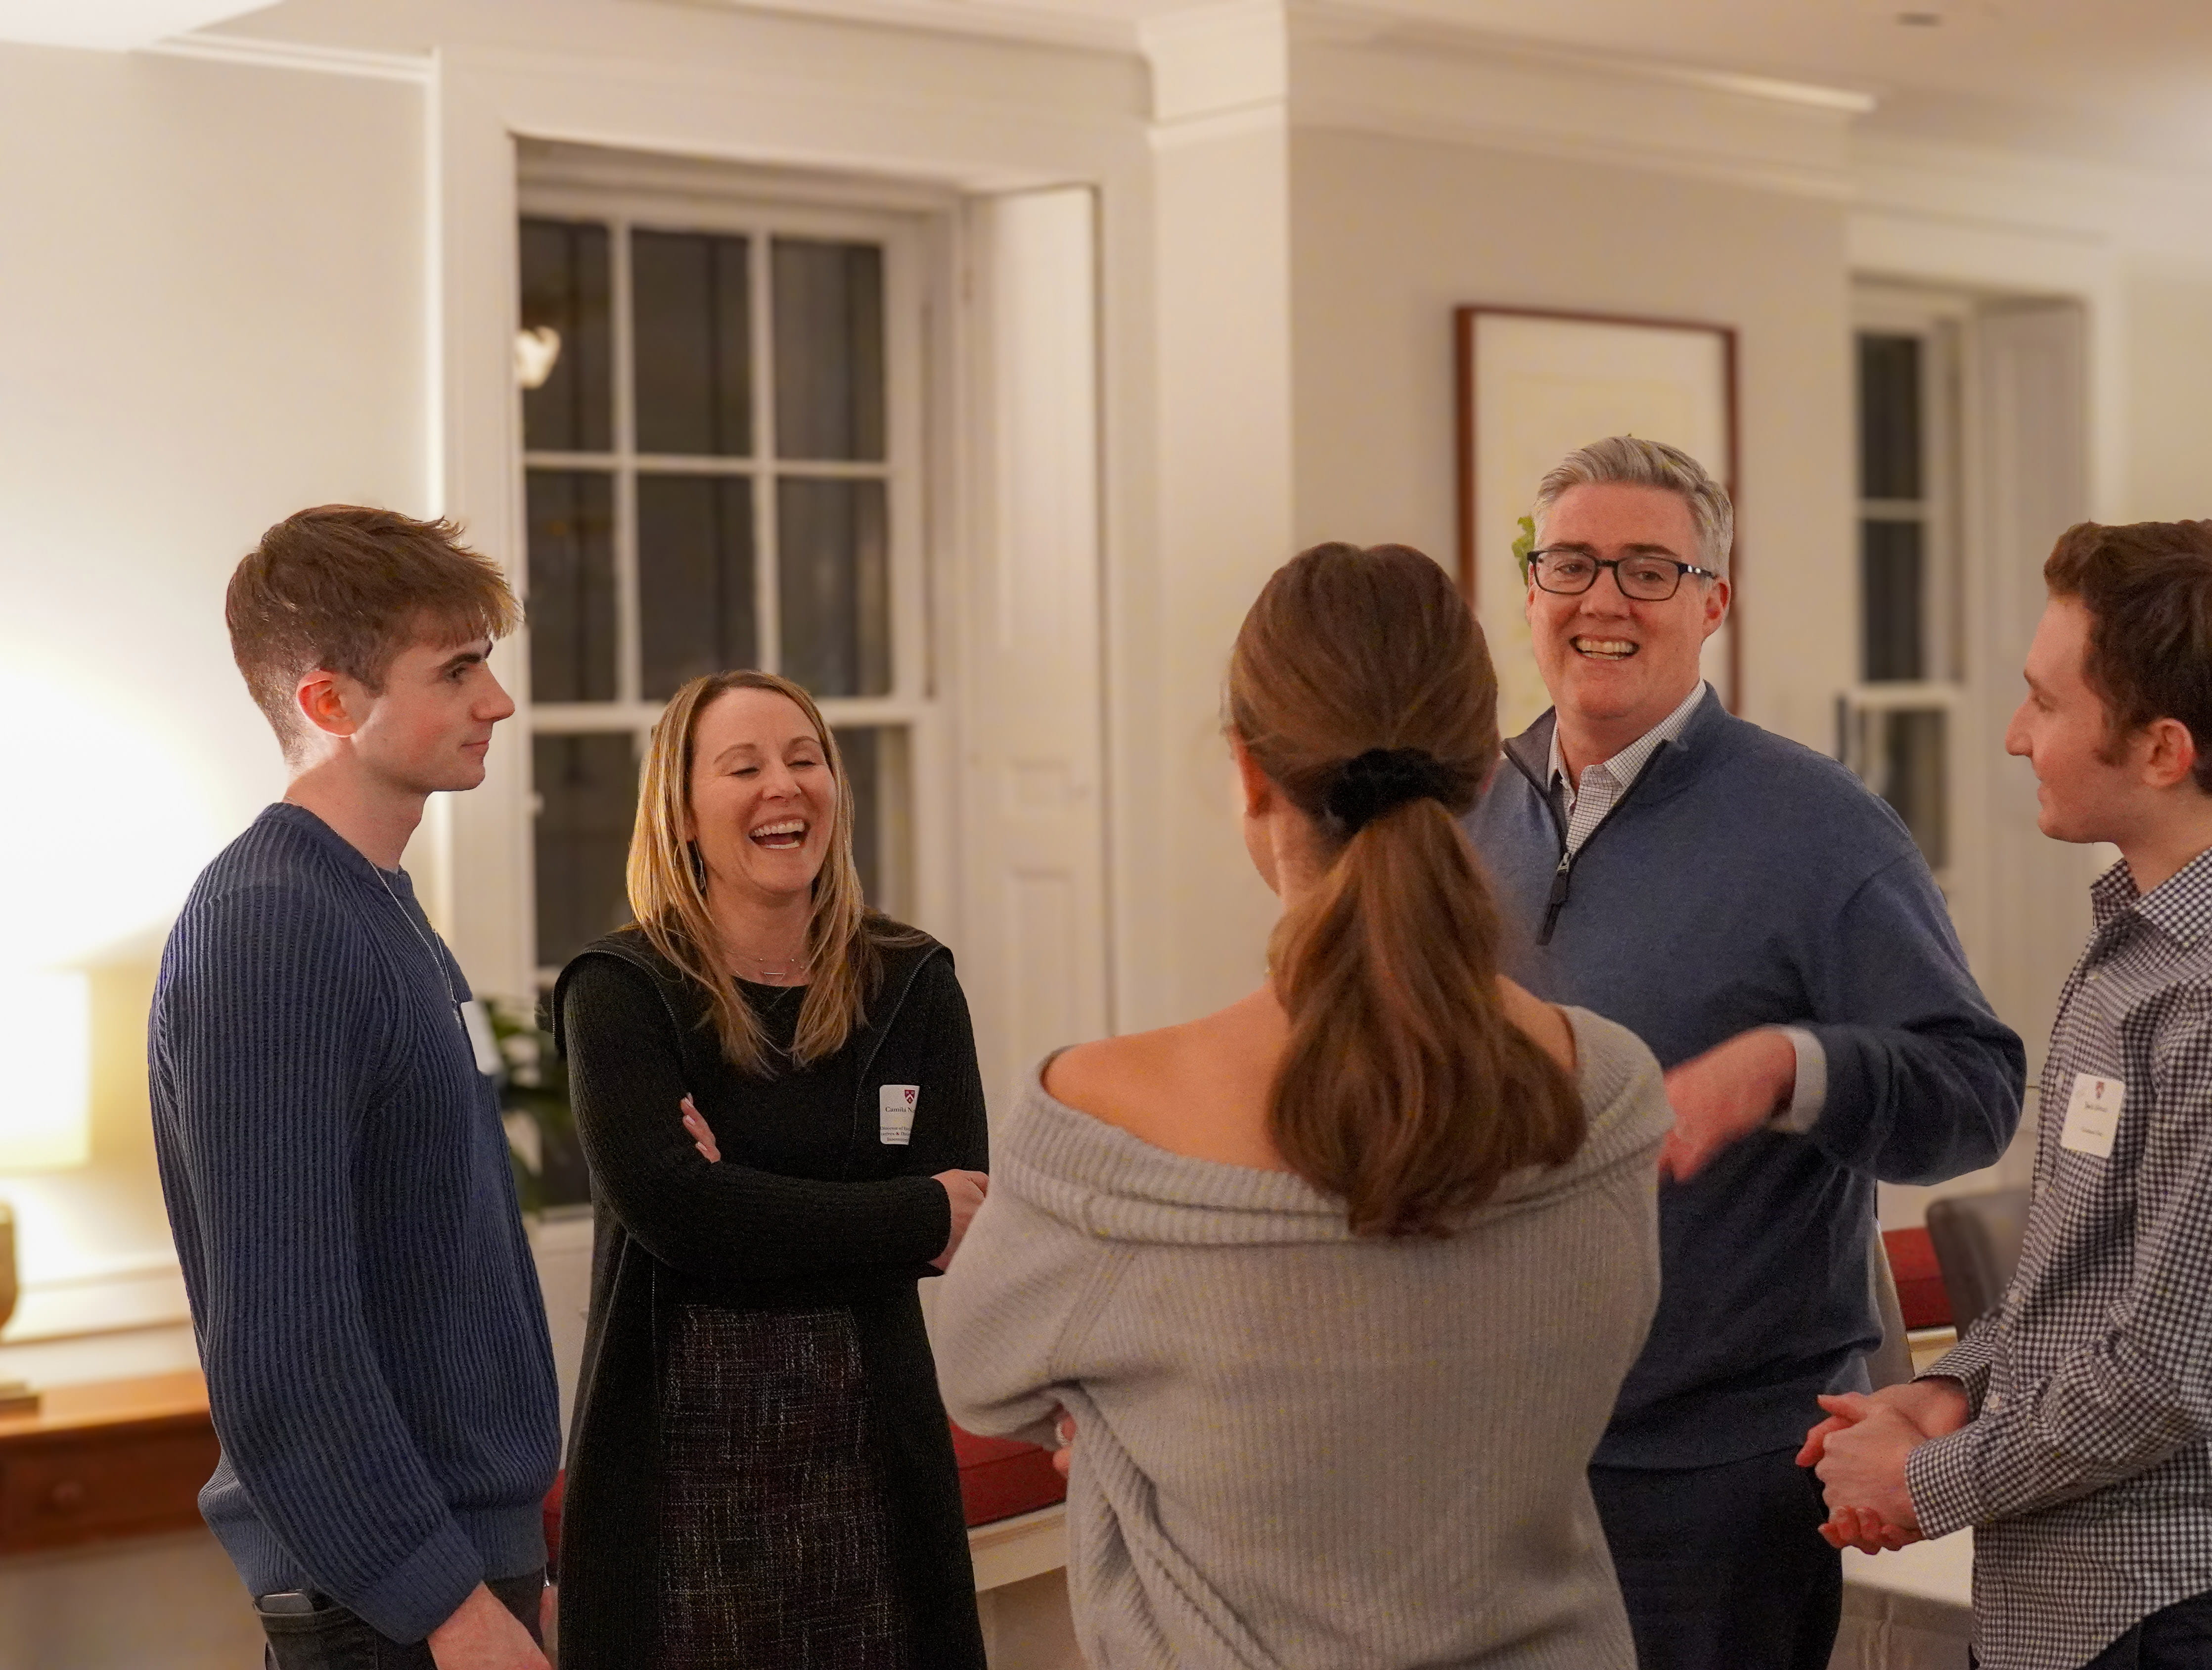 Dean of Students, Tom Dunne, and students engage in conversation around Intellectual Vitality